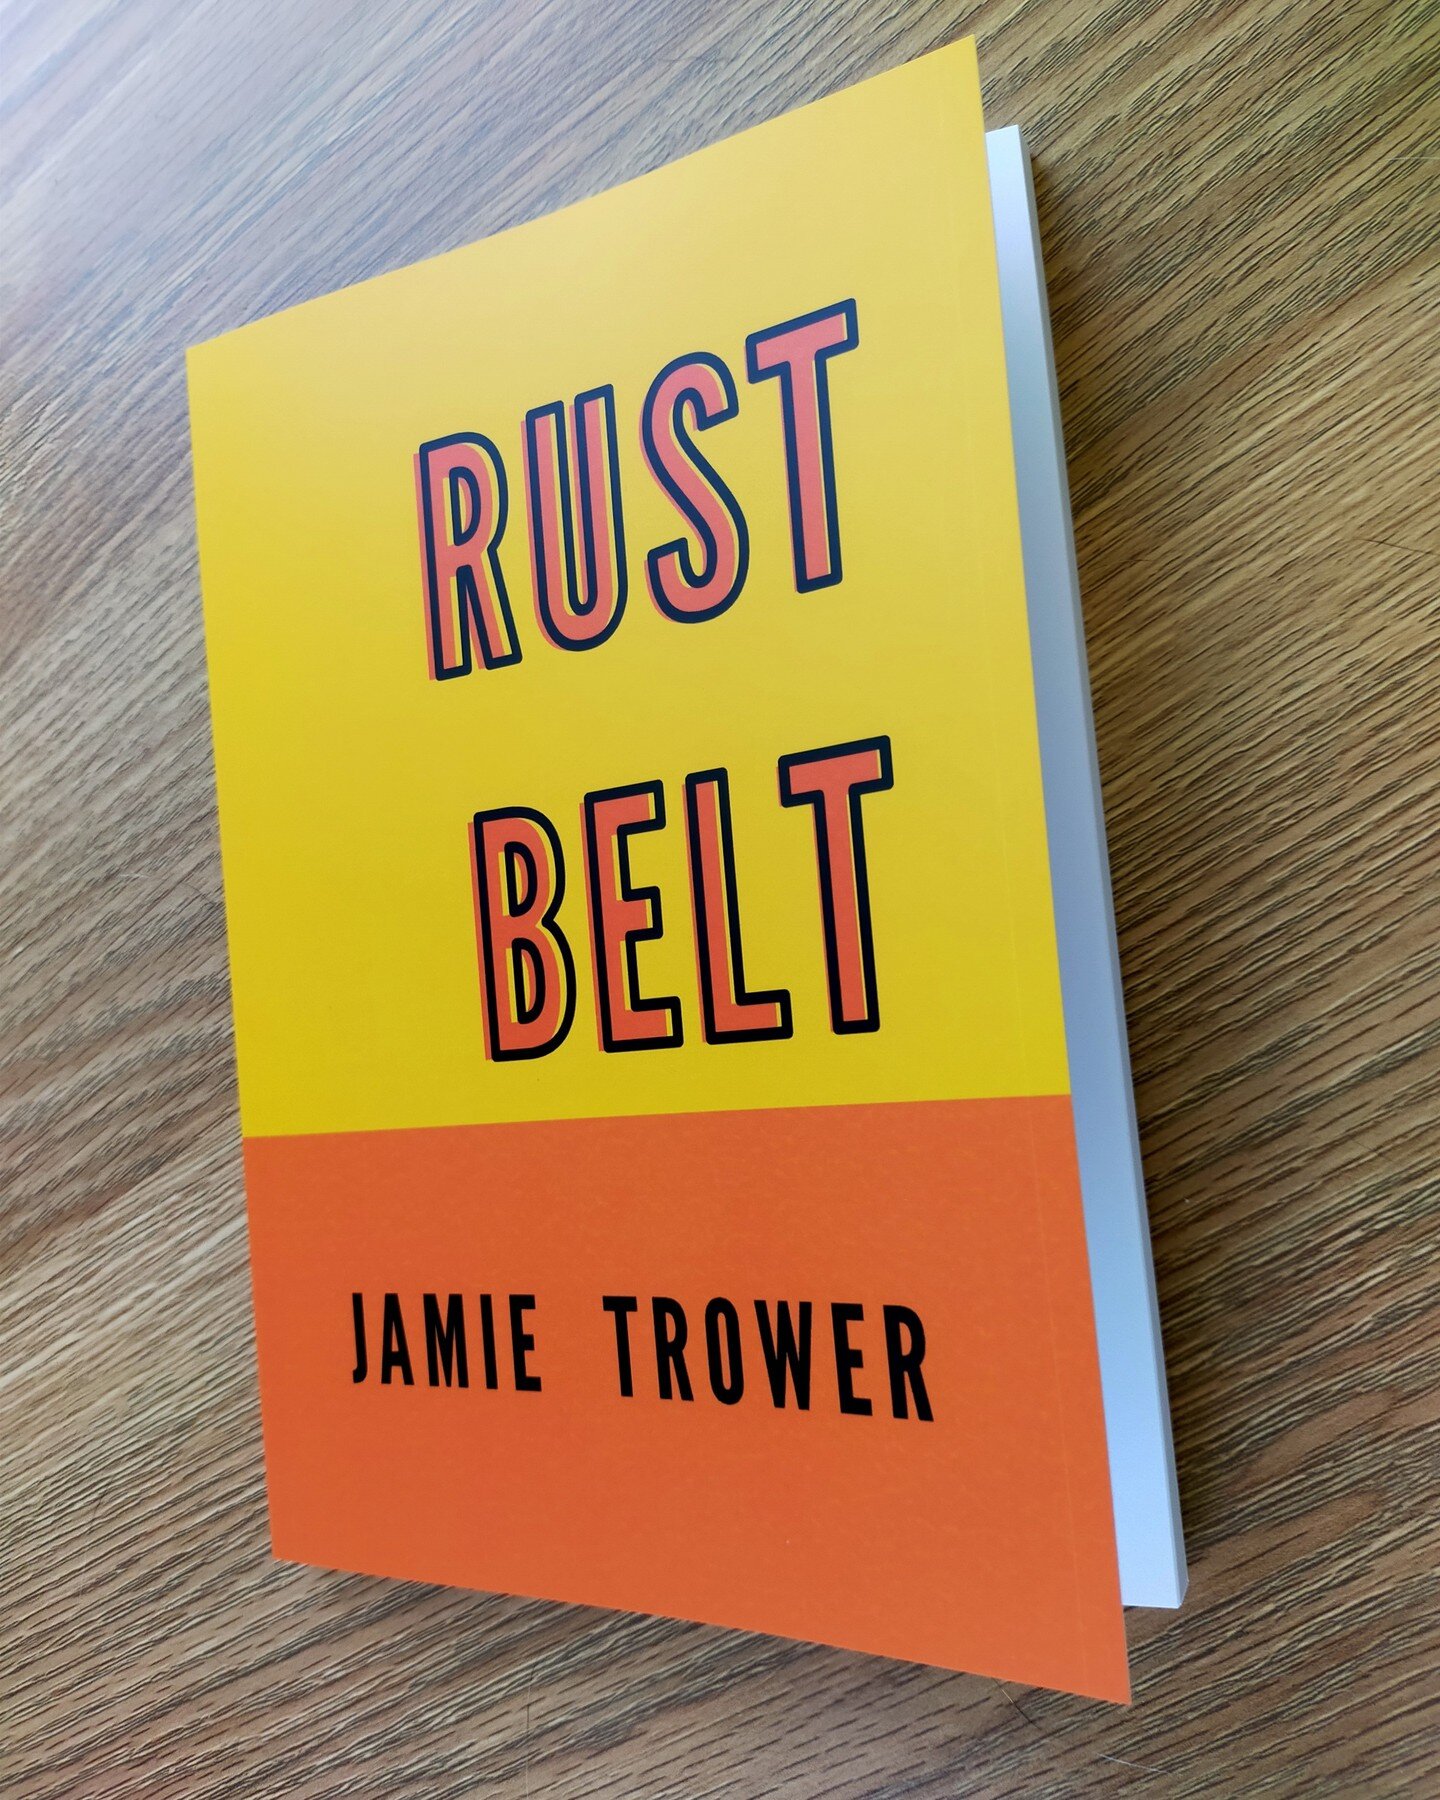 Merry Christmas everyone! Hope you are all having a splendid break!!!

To add to the jolly vibes, I&rsquo;m very excited to announce the publication of my third full poetry book, Rust Belt, published by my own BIRDBOY PRESS (more information about th